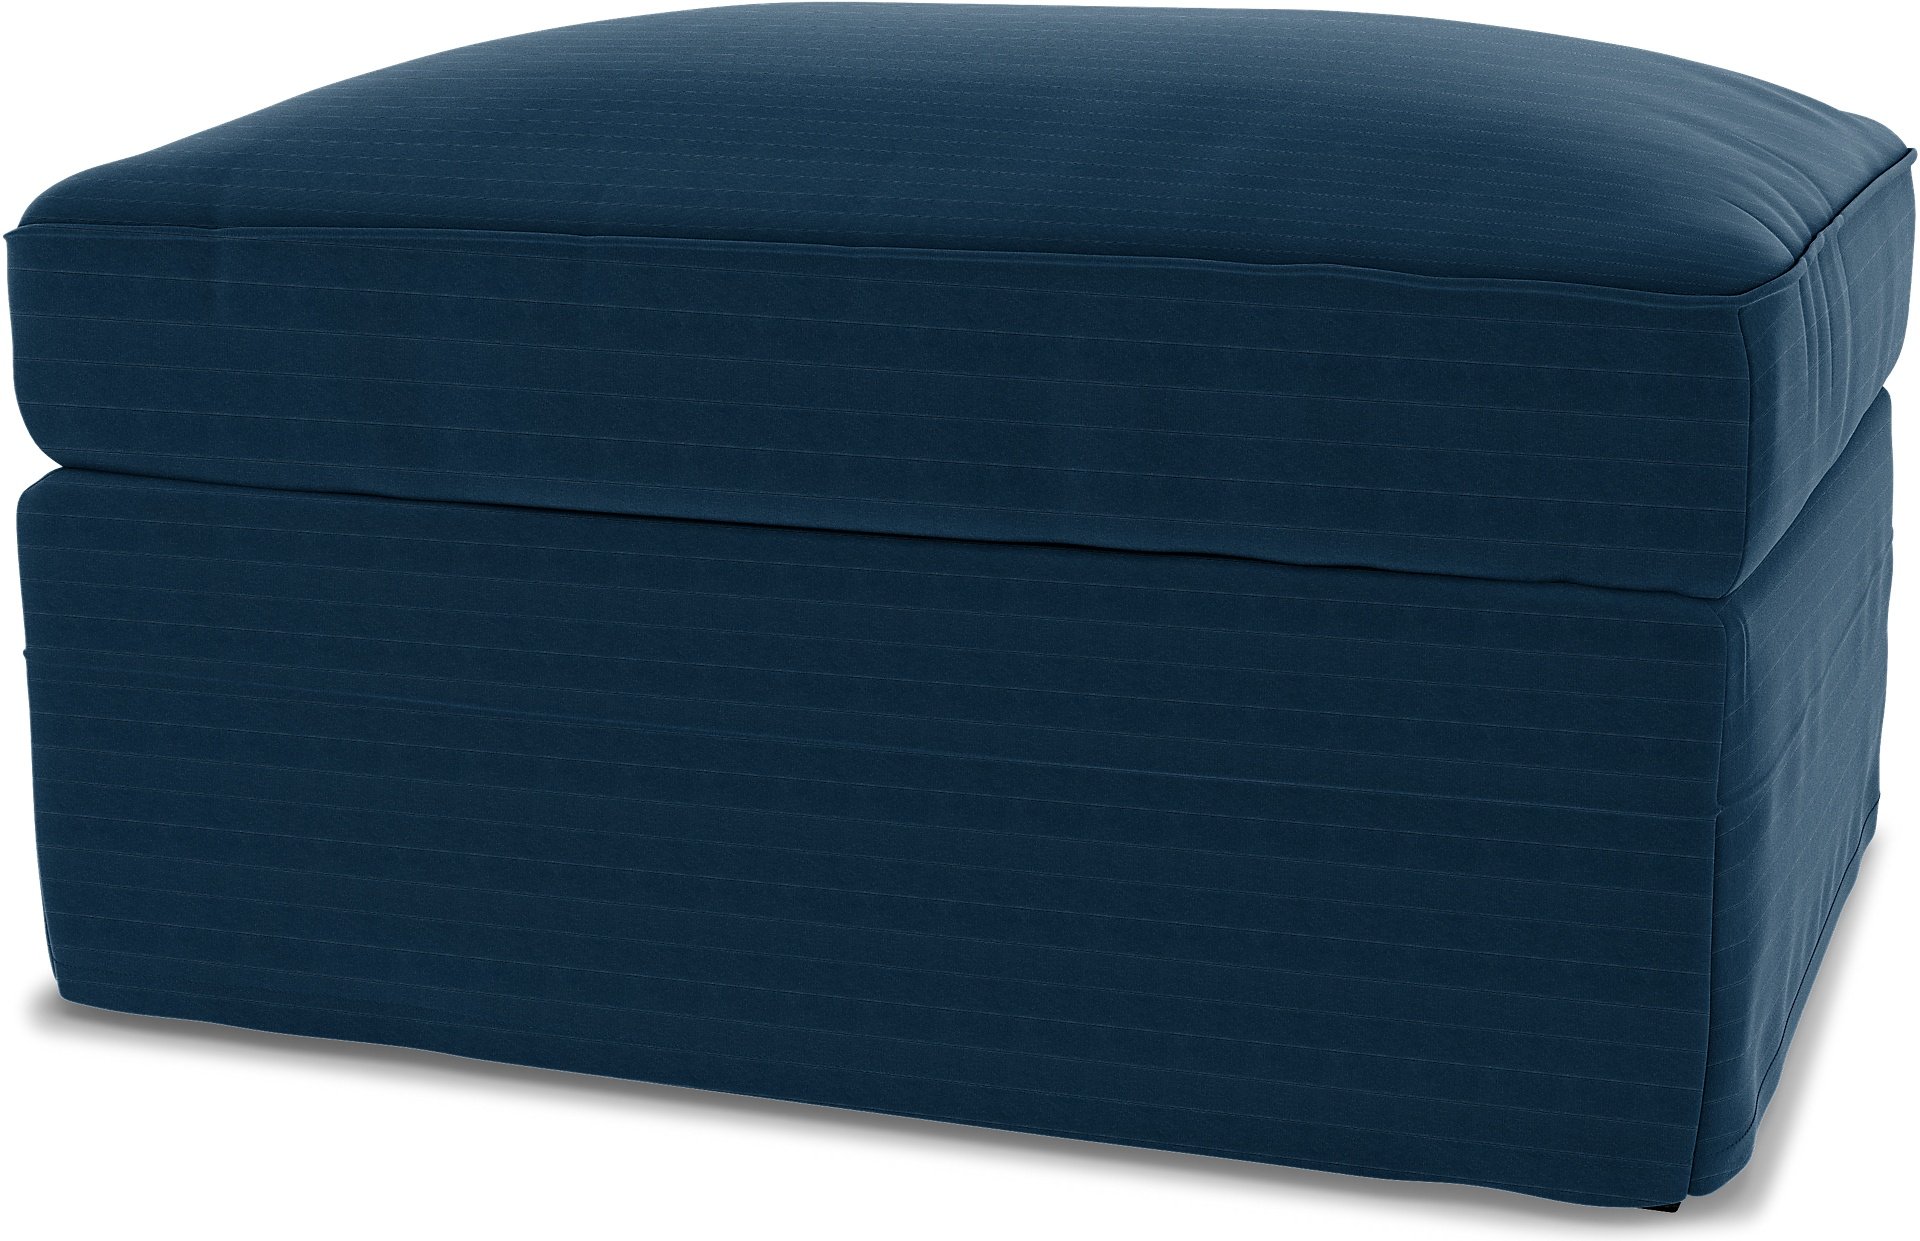 IKEA - Gronlid Footstool with Storage Cover, Denim Blue, Moody Seventies Collection - Bemz